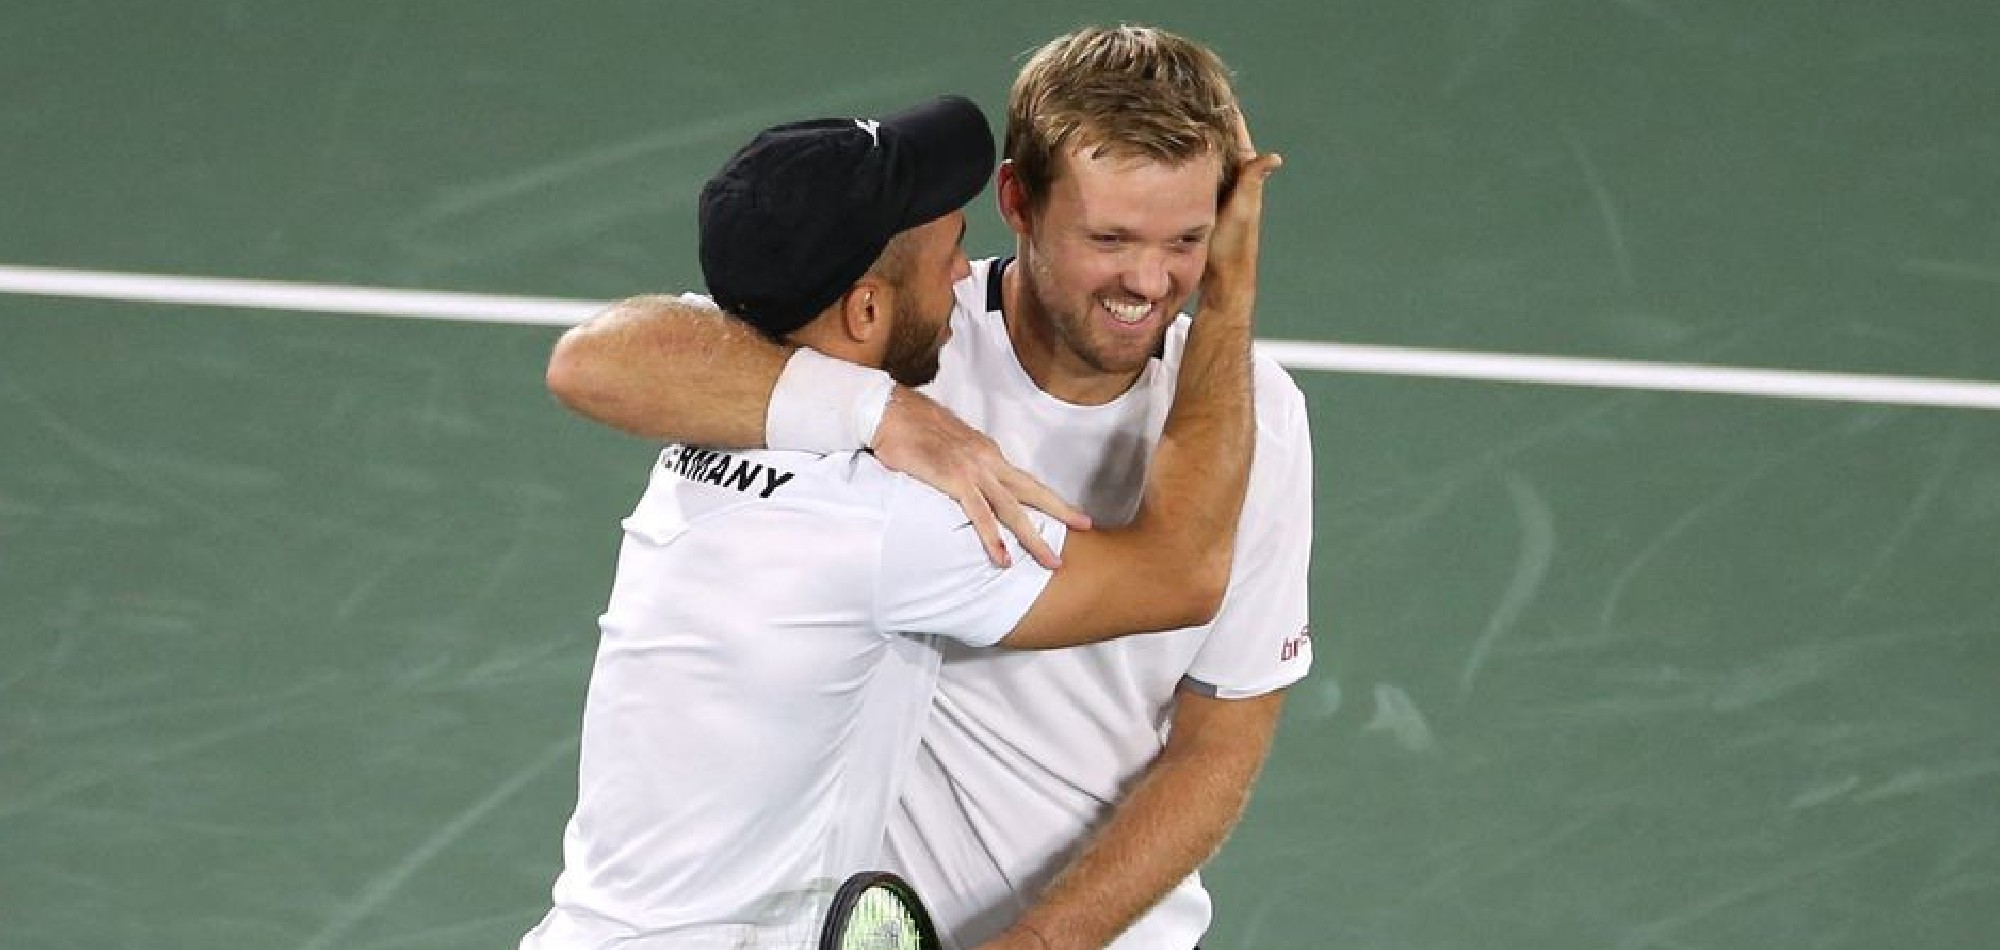 Germany win first Davis Cup tie against France in 84 years